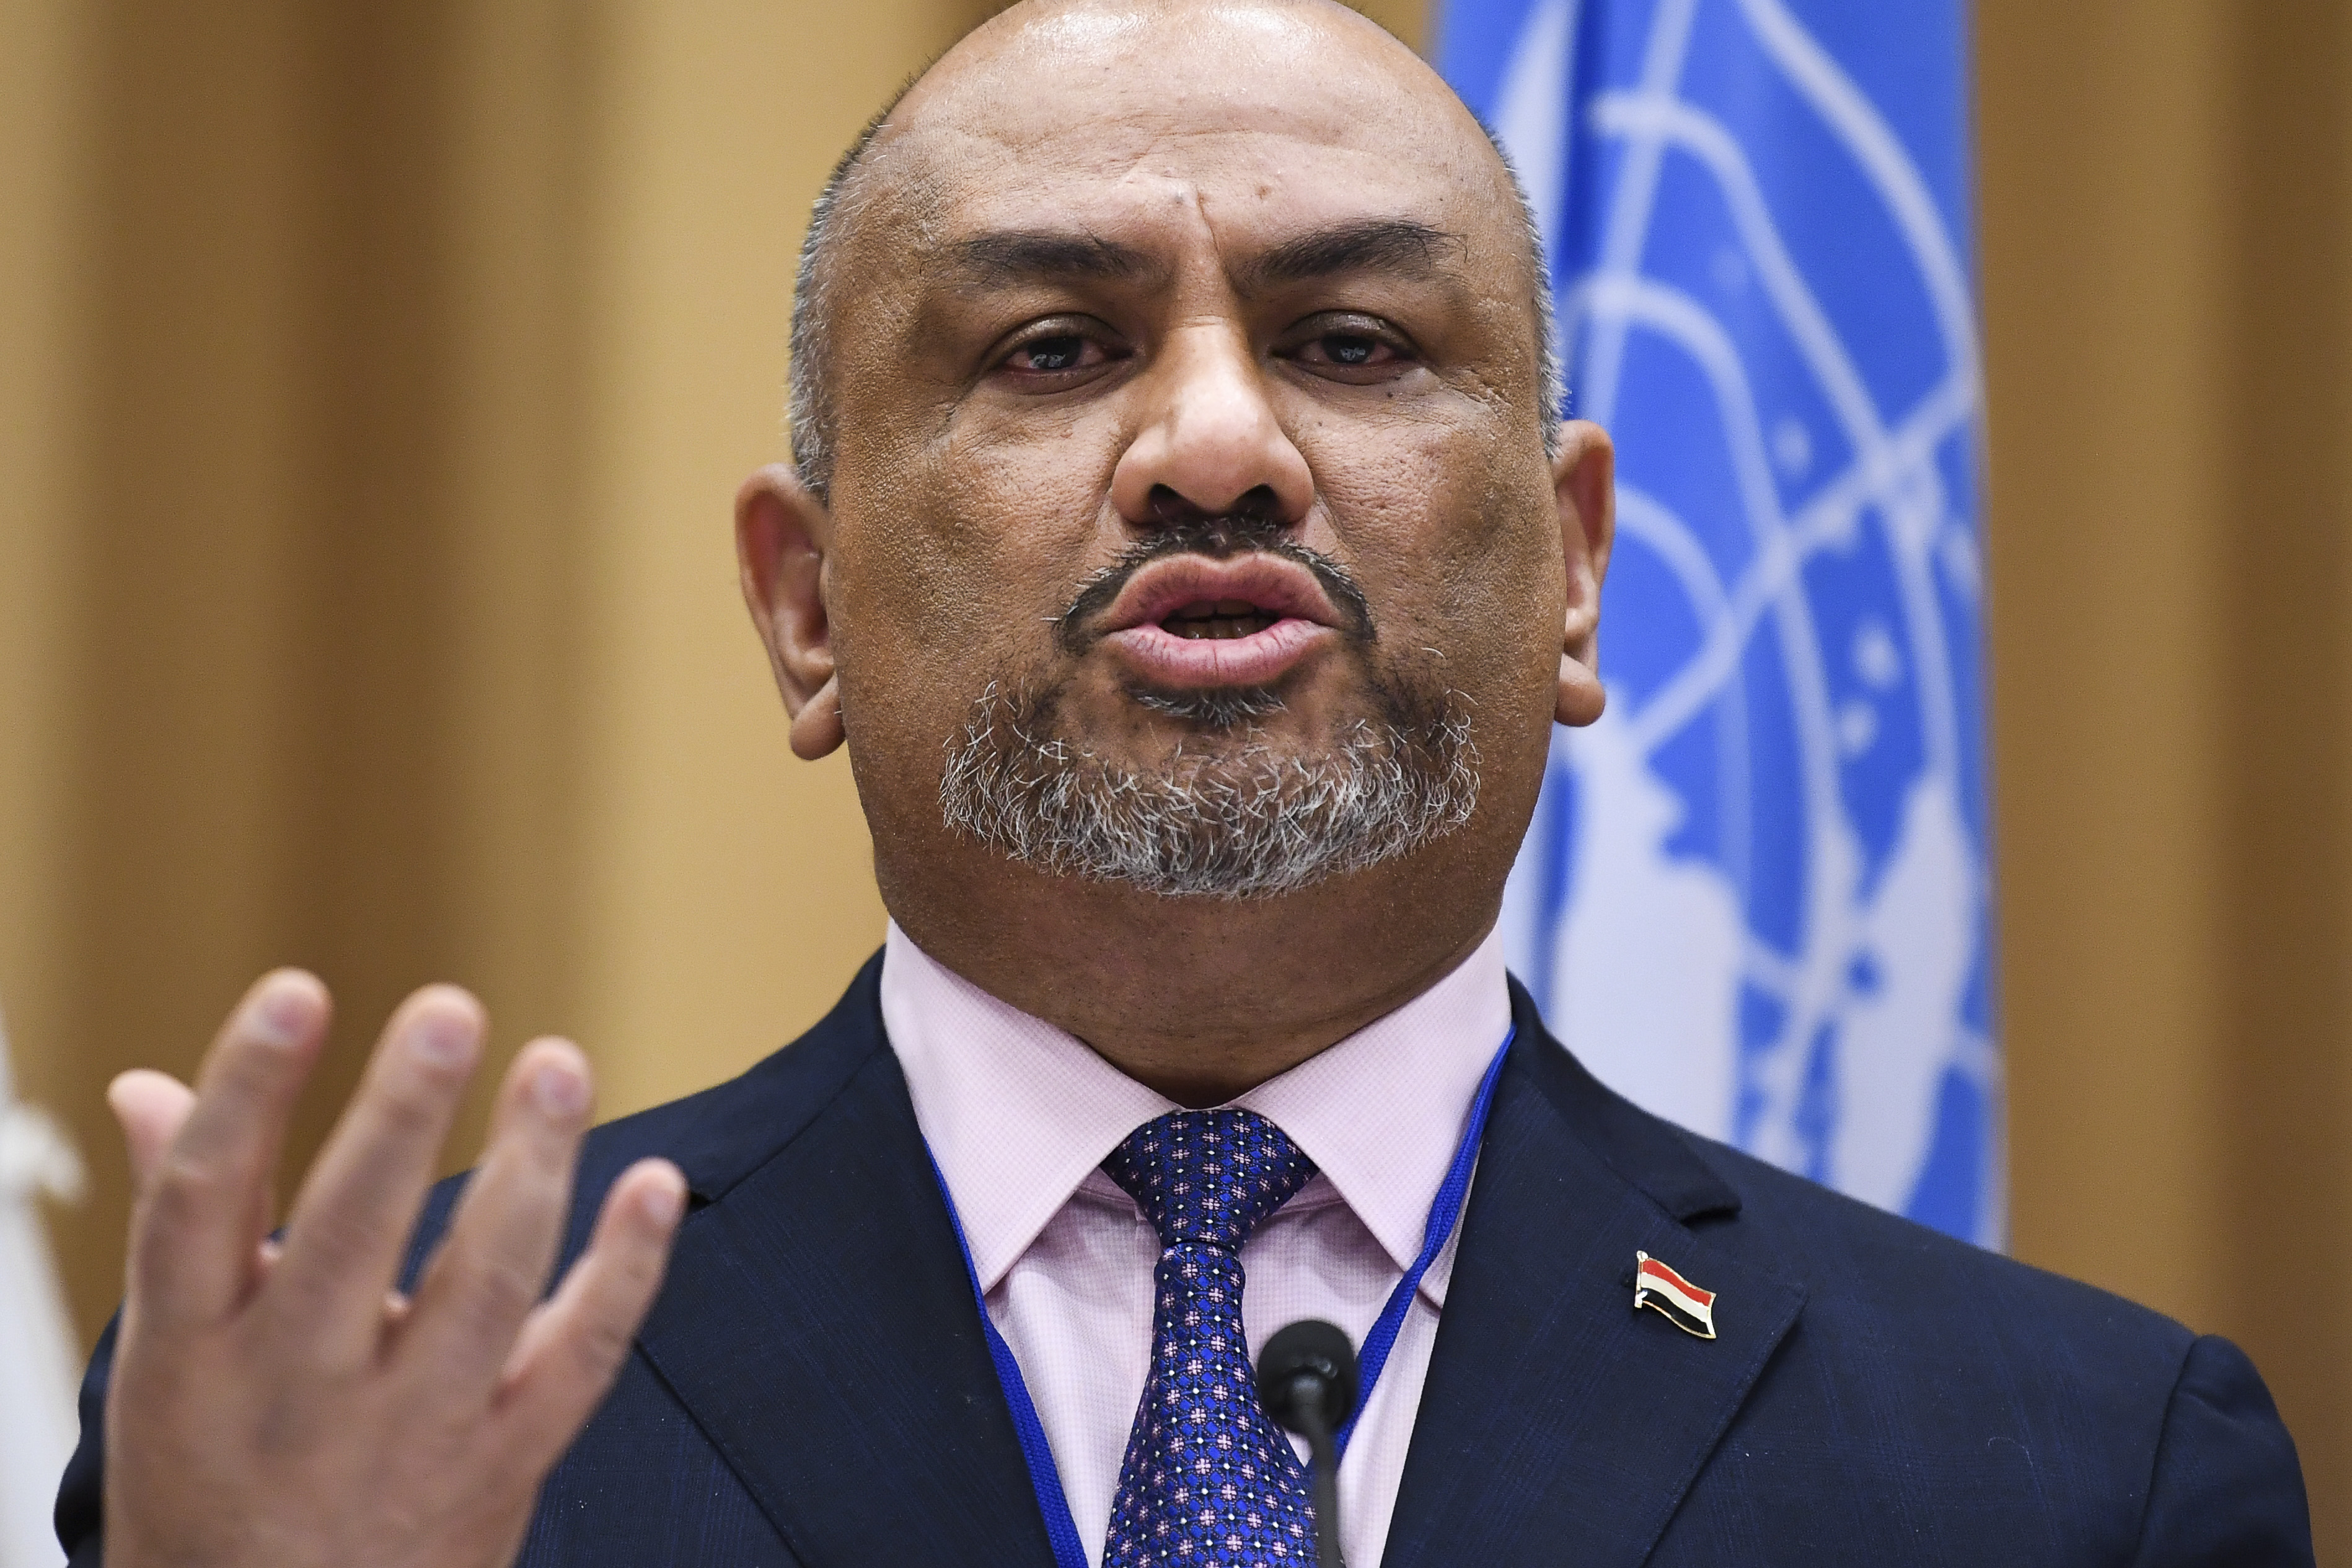 Yemeni Foreign Minister Said to Have Resigned